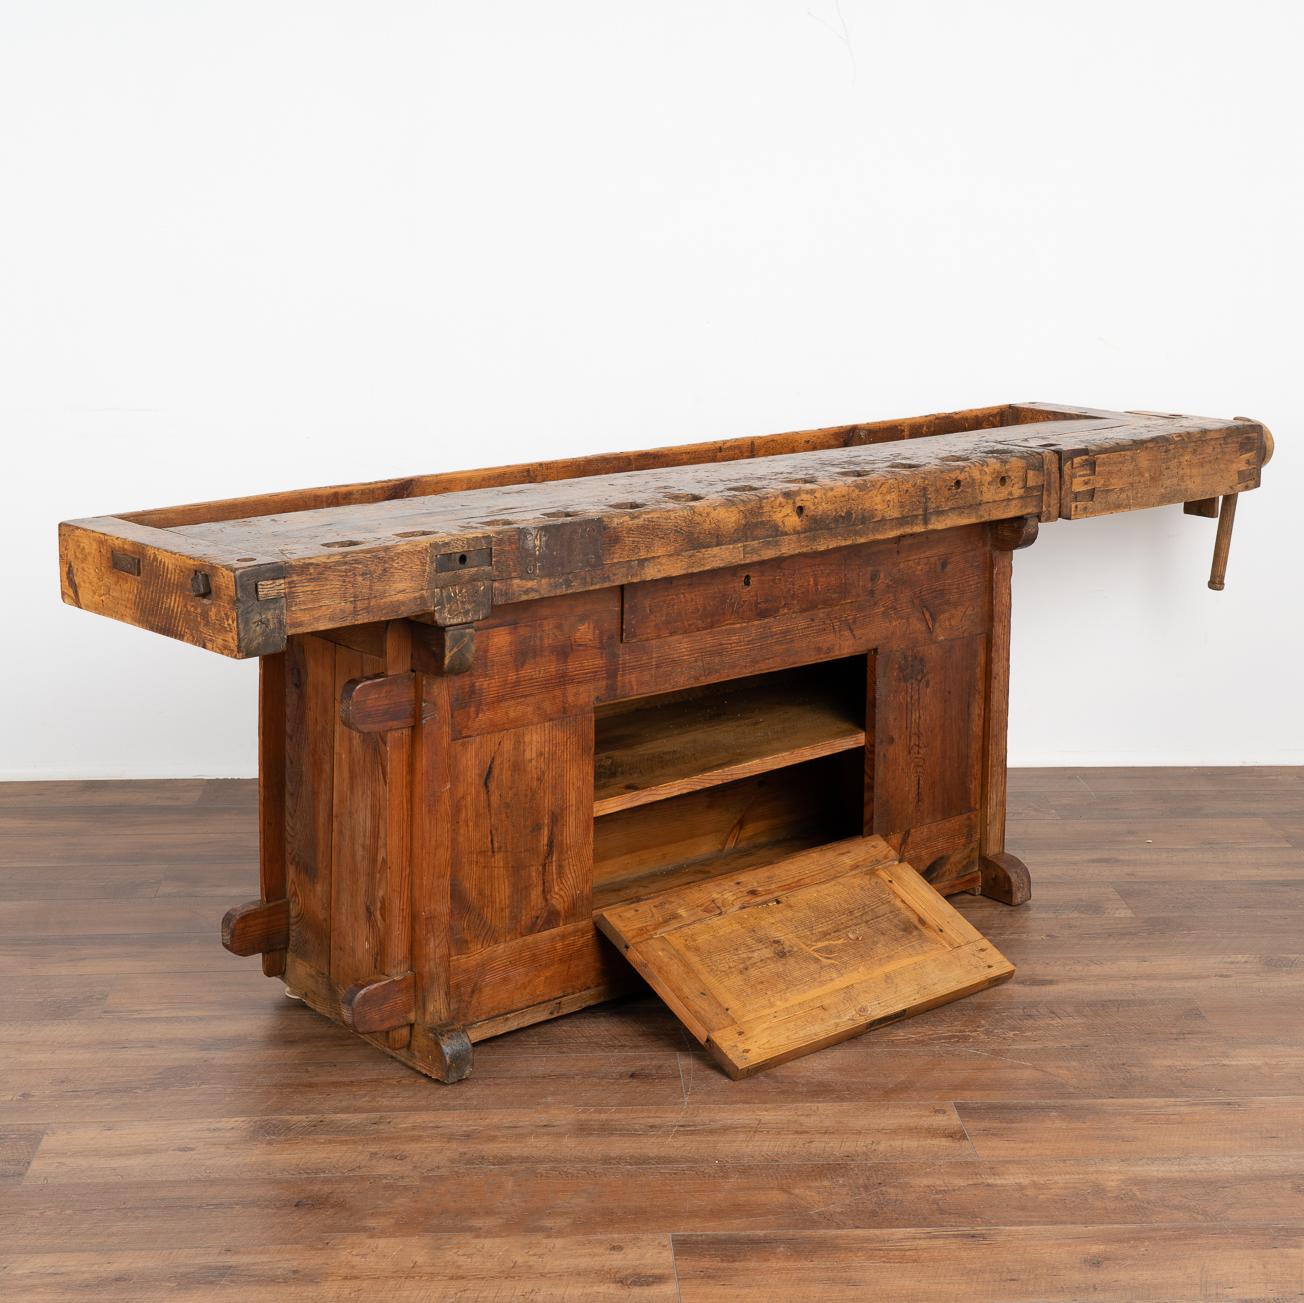 Danish Antique Carpenters Workbench Rustic Console Table with Cabinet, circa 1890